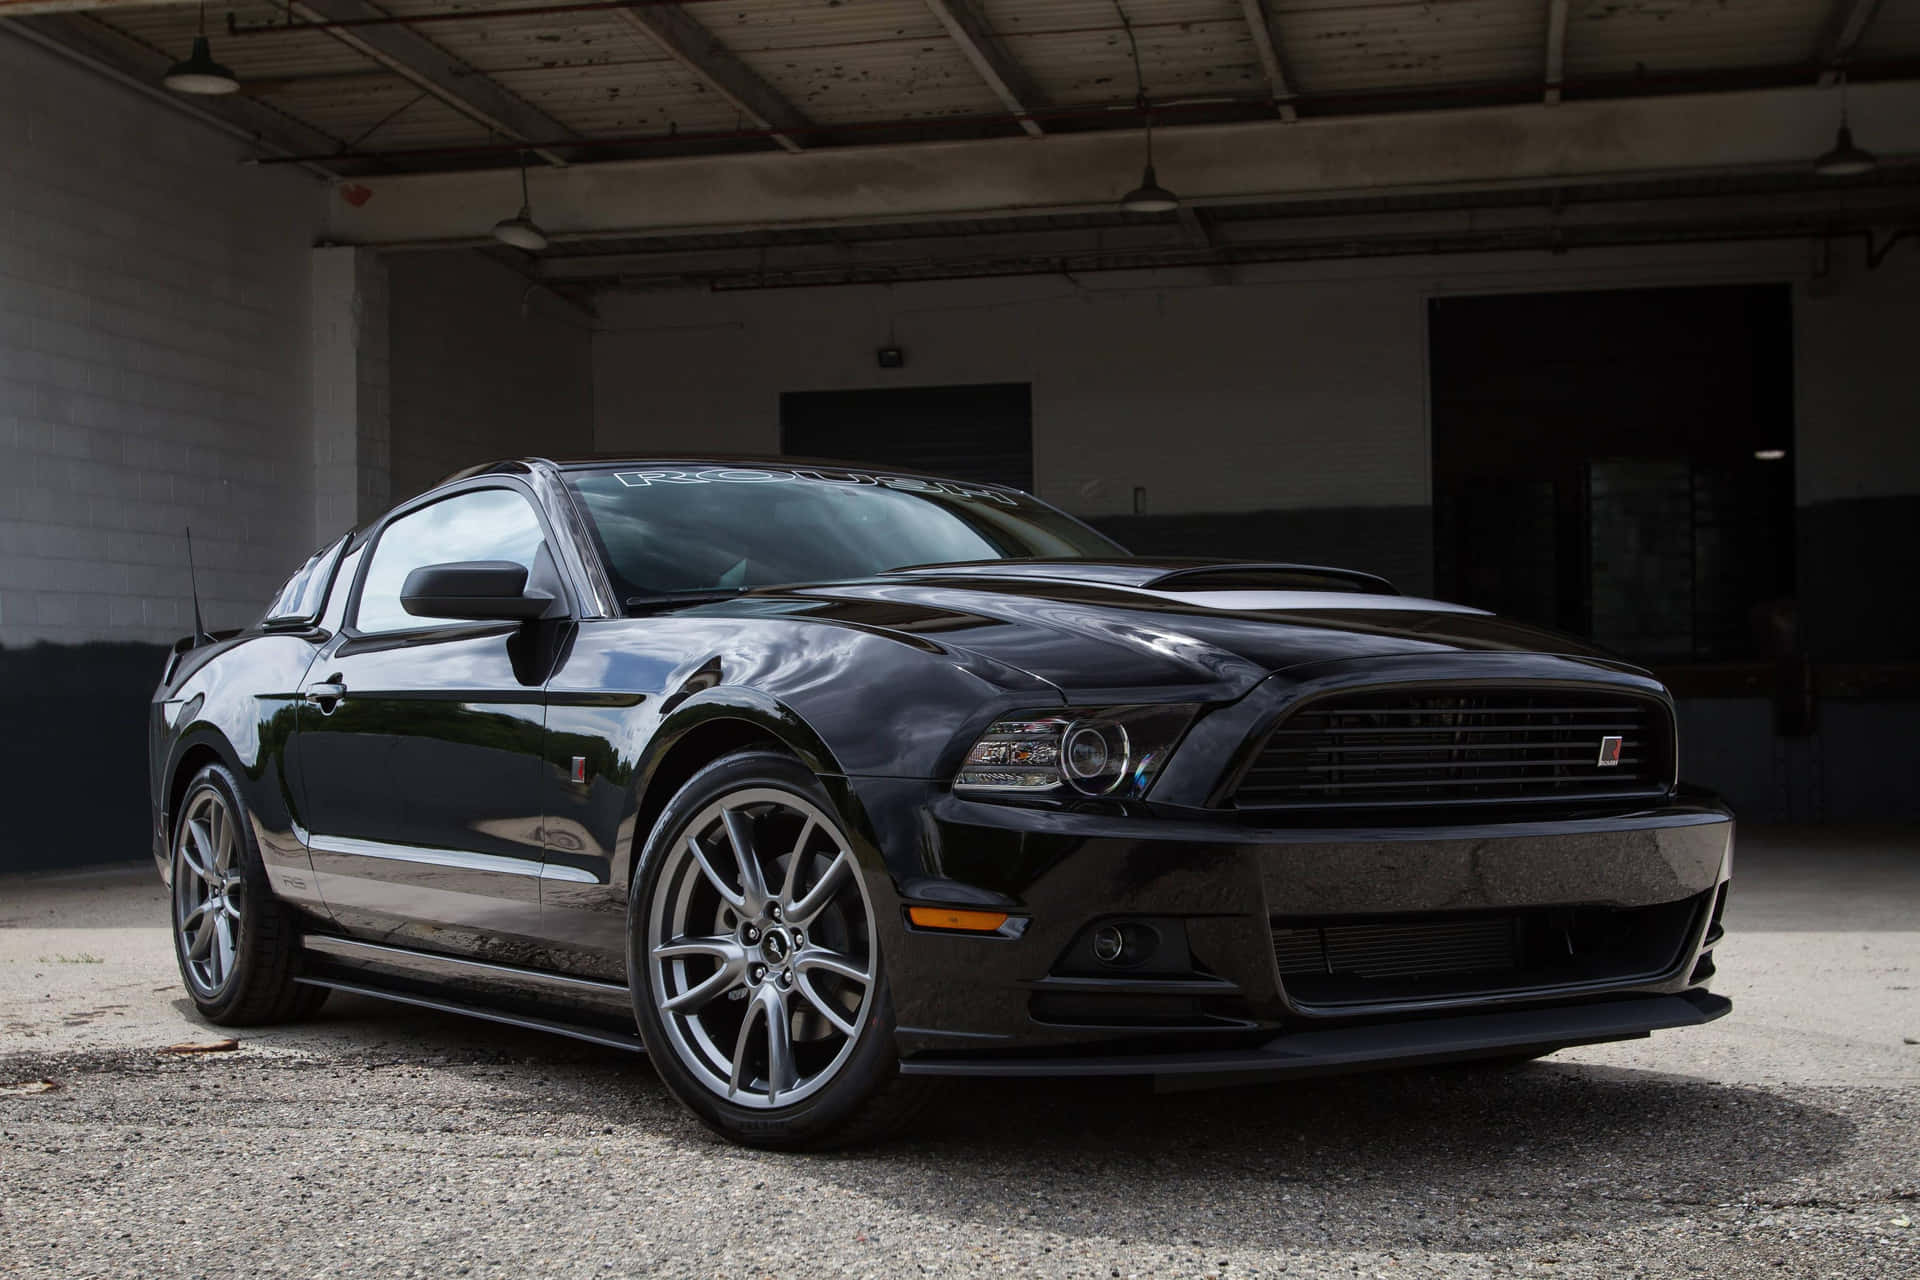 Stunning Ford Mustang Roush on the Road Wallpaper